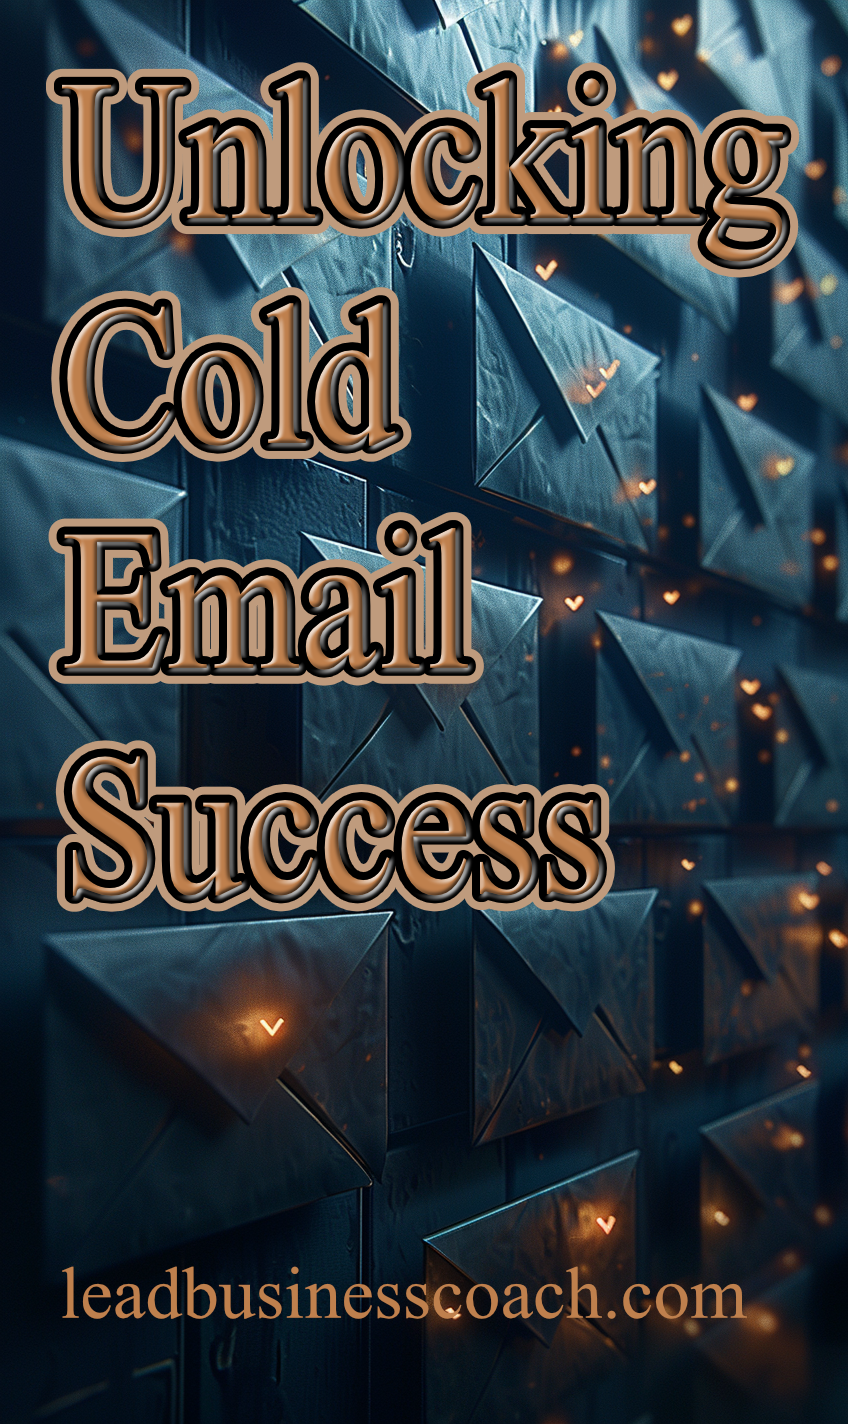 Leveraging Cold Email Lists for Home-Based Business Success: Tips and Strategies